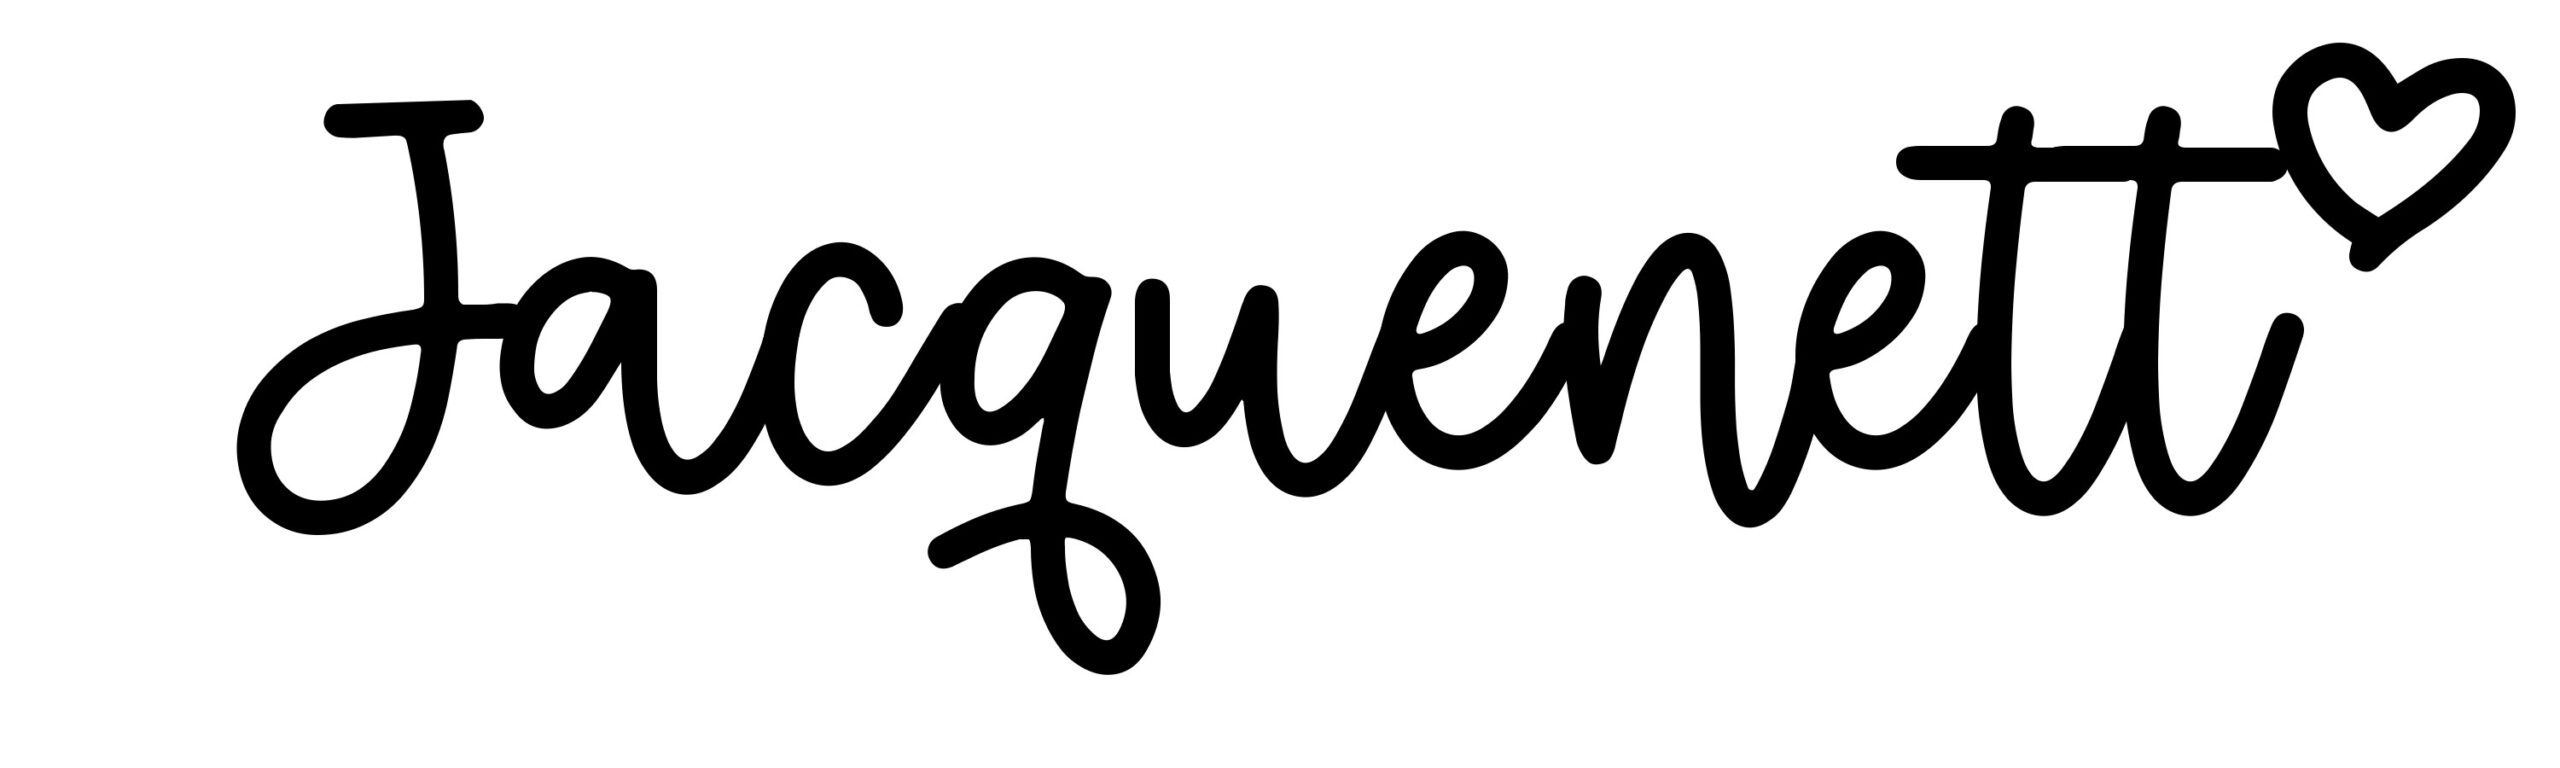 Jacquenette - Name meaning, origin, variations and more